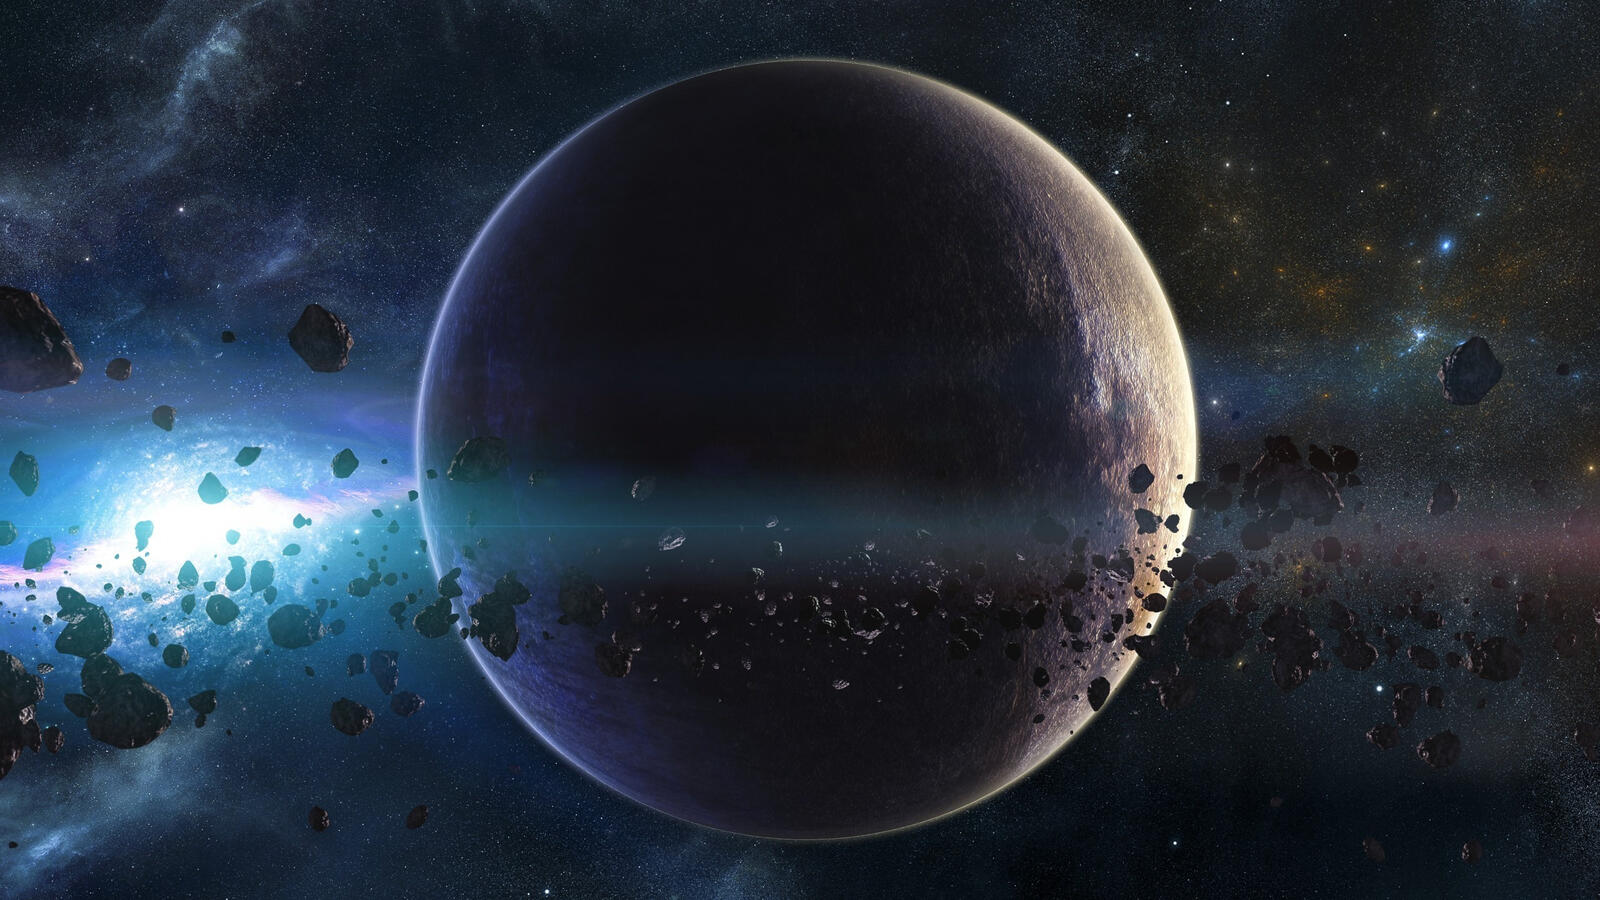 Wallpapers wallpaper planet asteroids space on the desktop